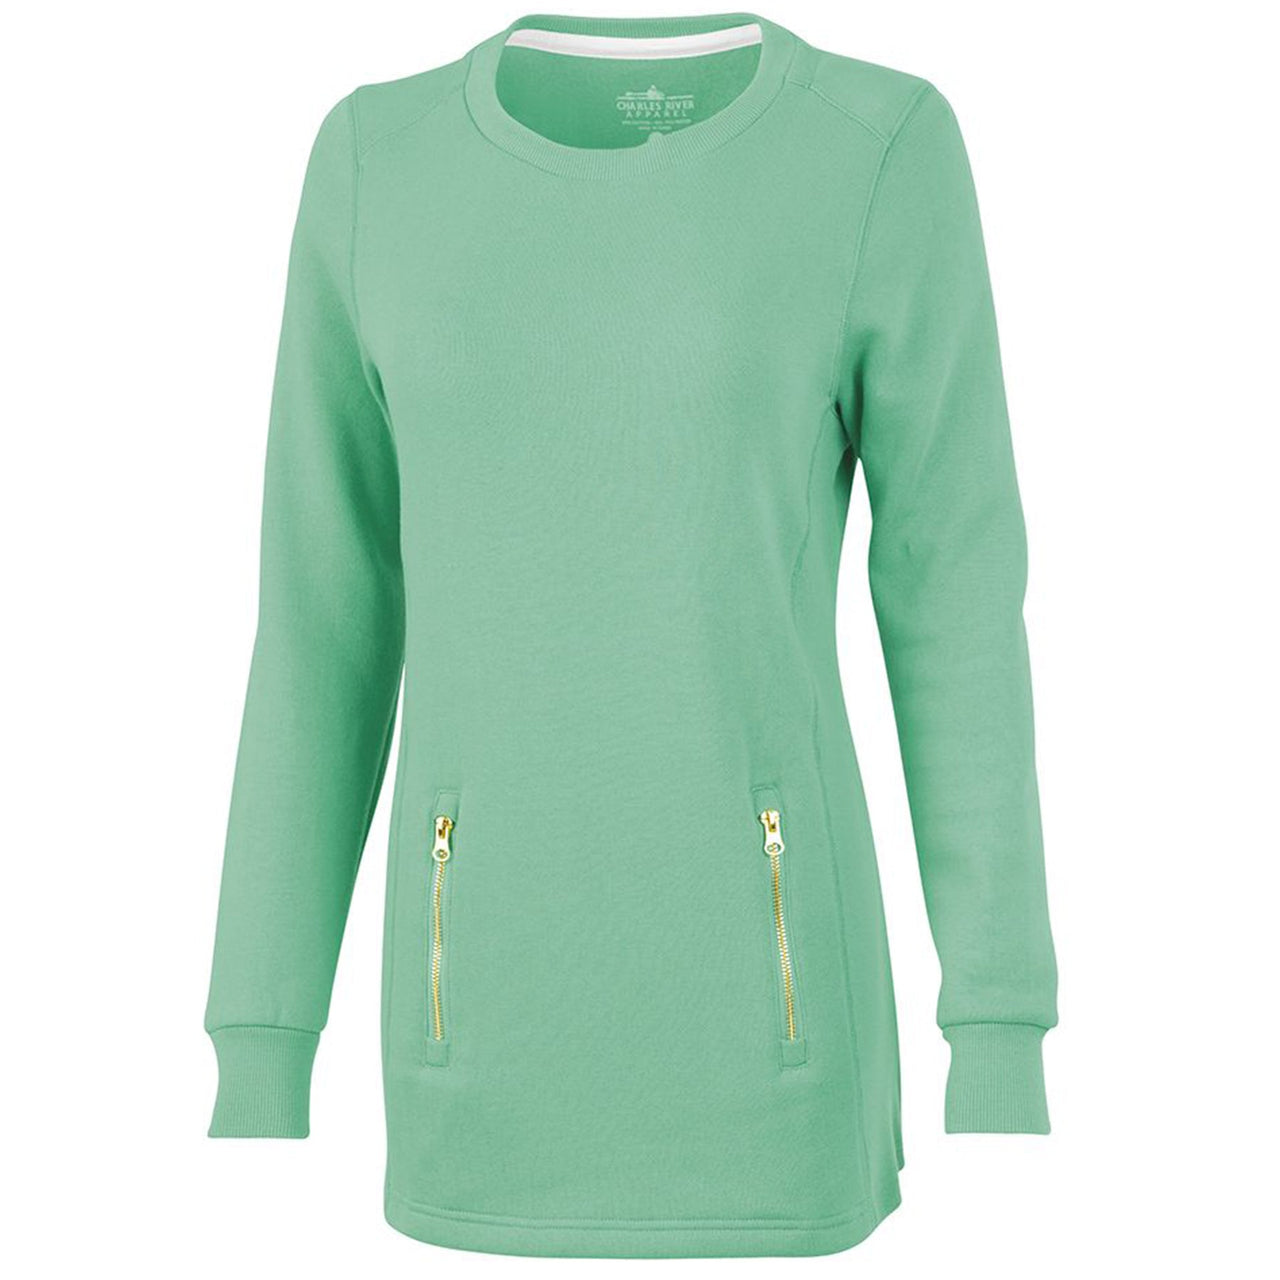 the front of the women's mint crewneck sweatshirt features a crewneck, long sleeves, and a gold zipper enclosed front pocket